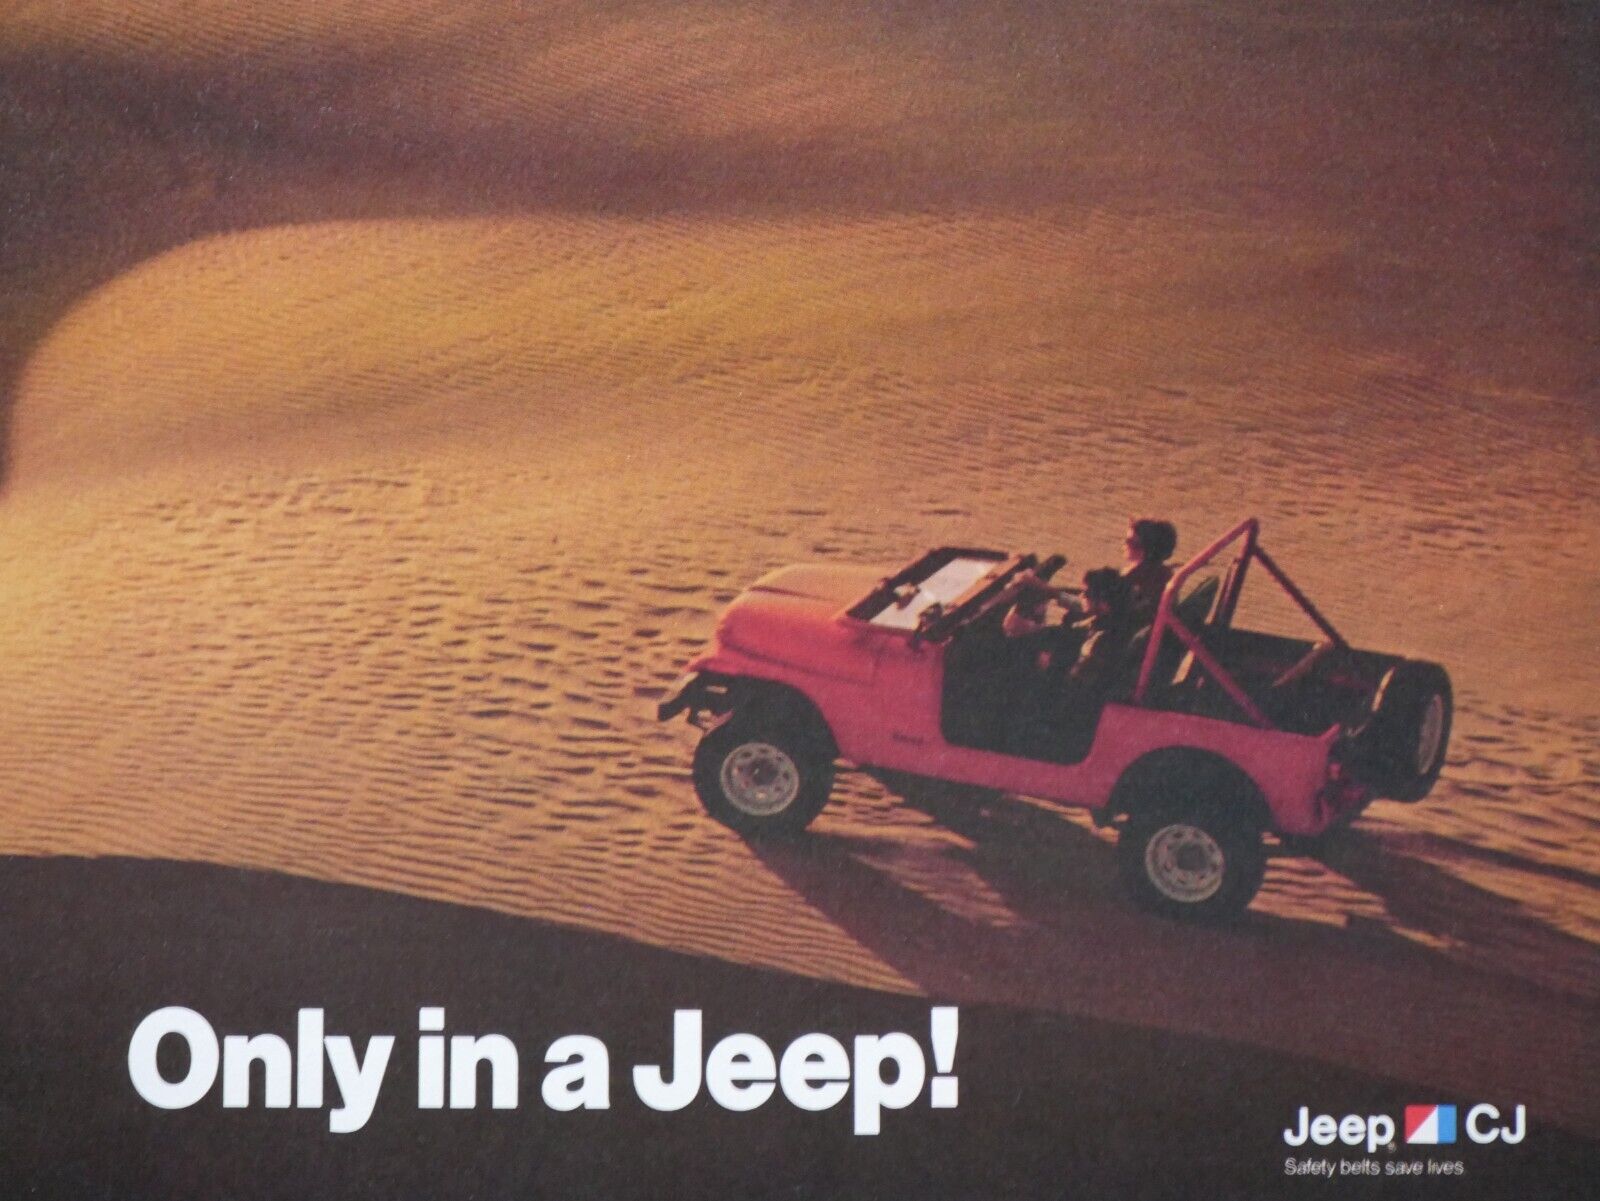 1985 Jeep Wrangler CJ Vintage Only In A Jeep Original Print Ad 8.5 x 11\